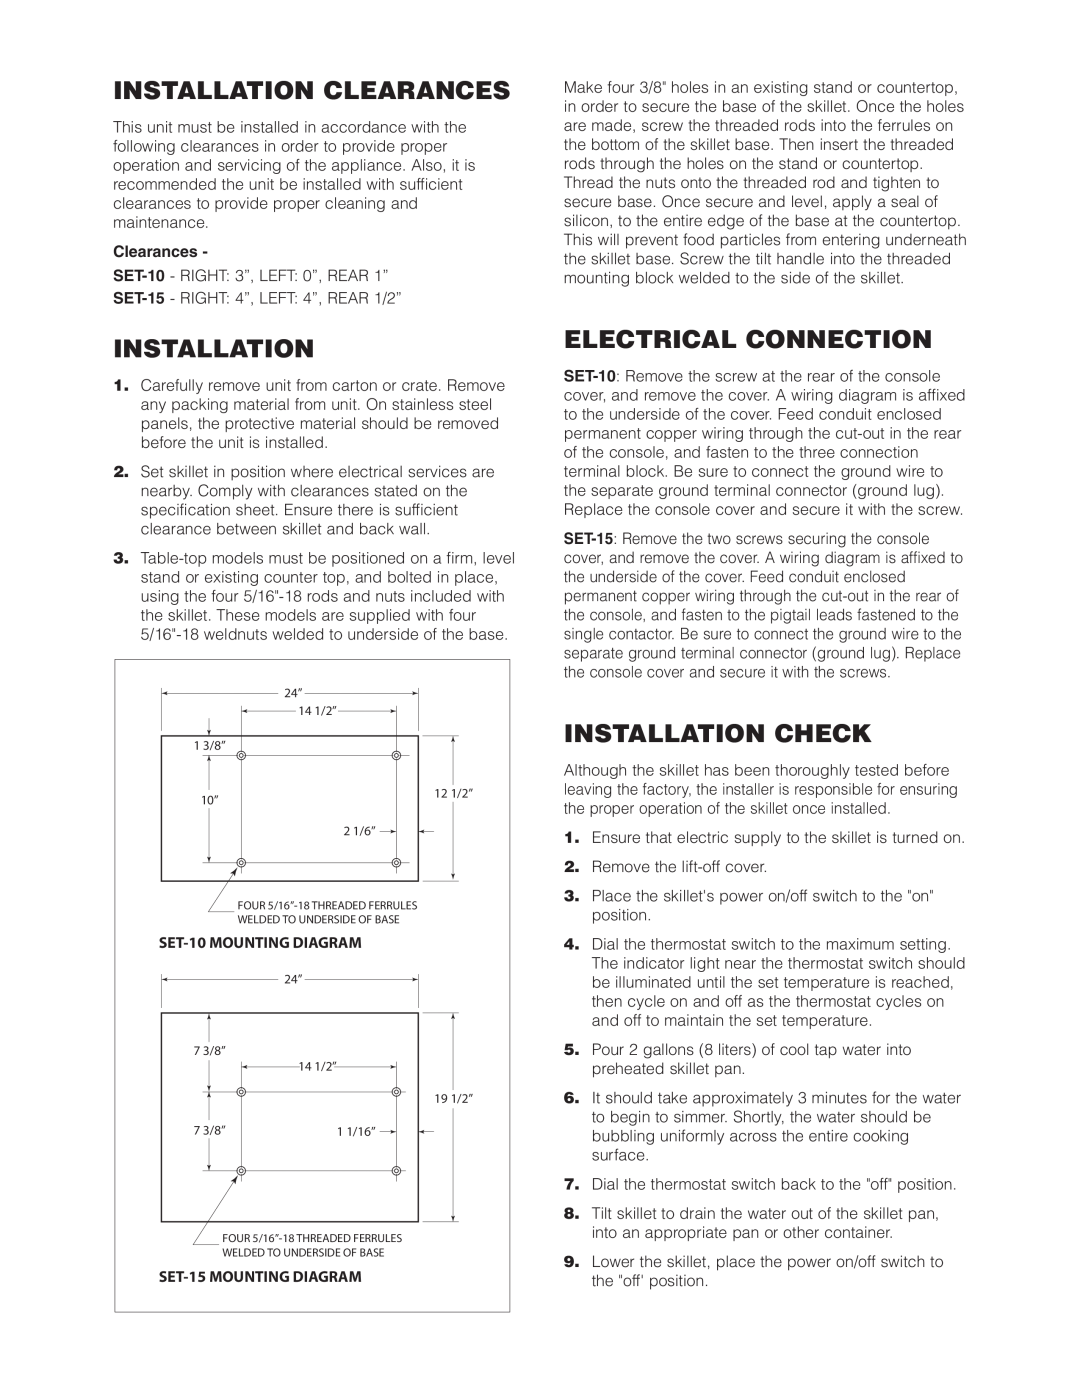 Cleveland Range SET-15 Installation Clearances, Electrical Connection, Installation Check, SET-10 MOUNTING DIAGRAM 